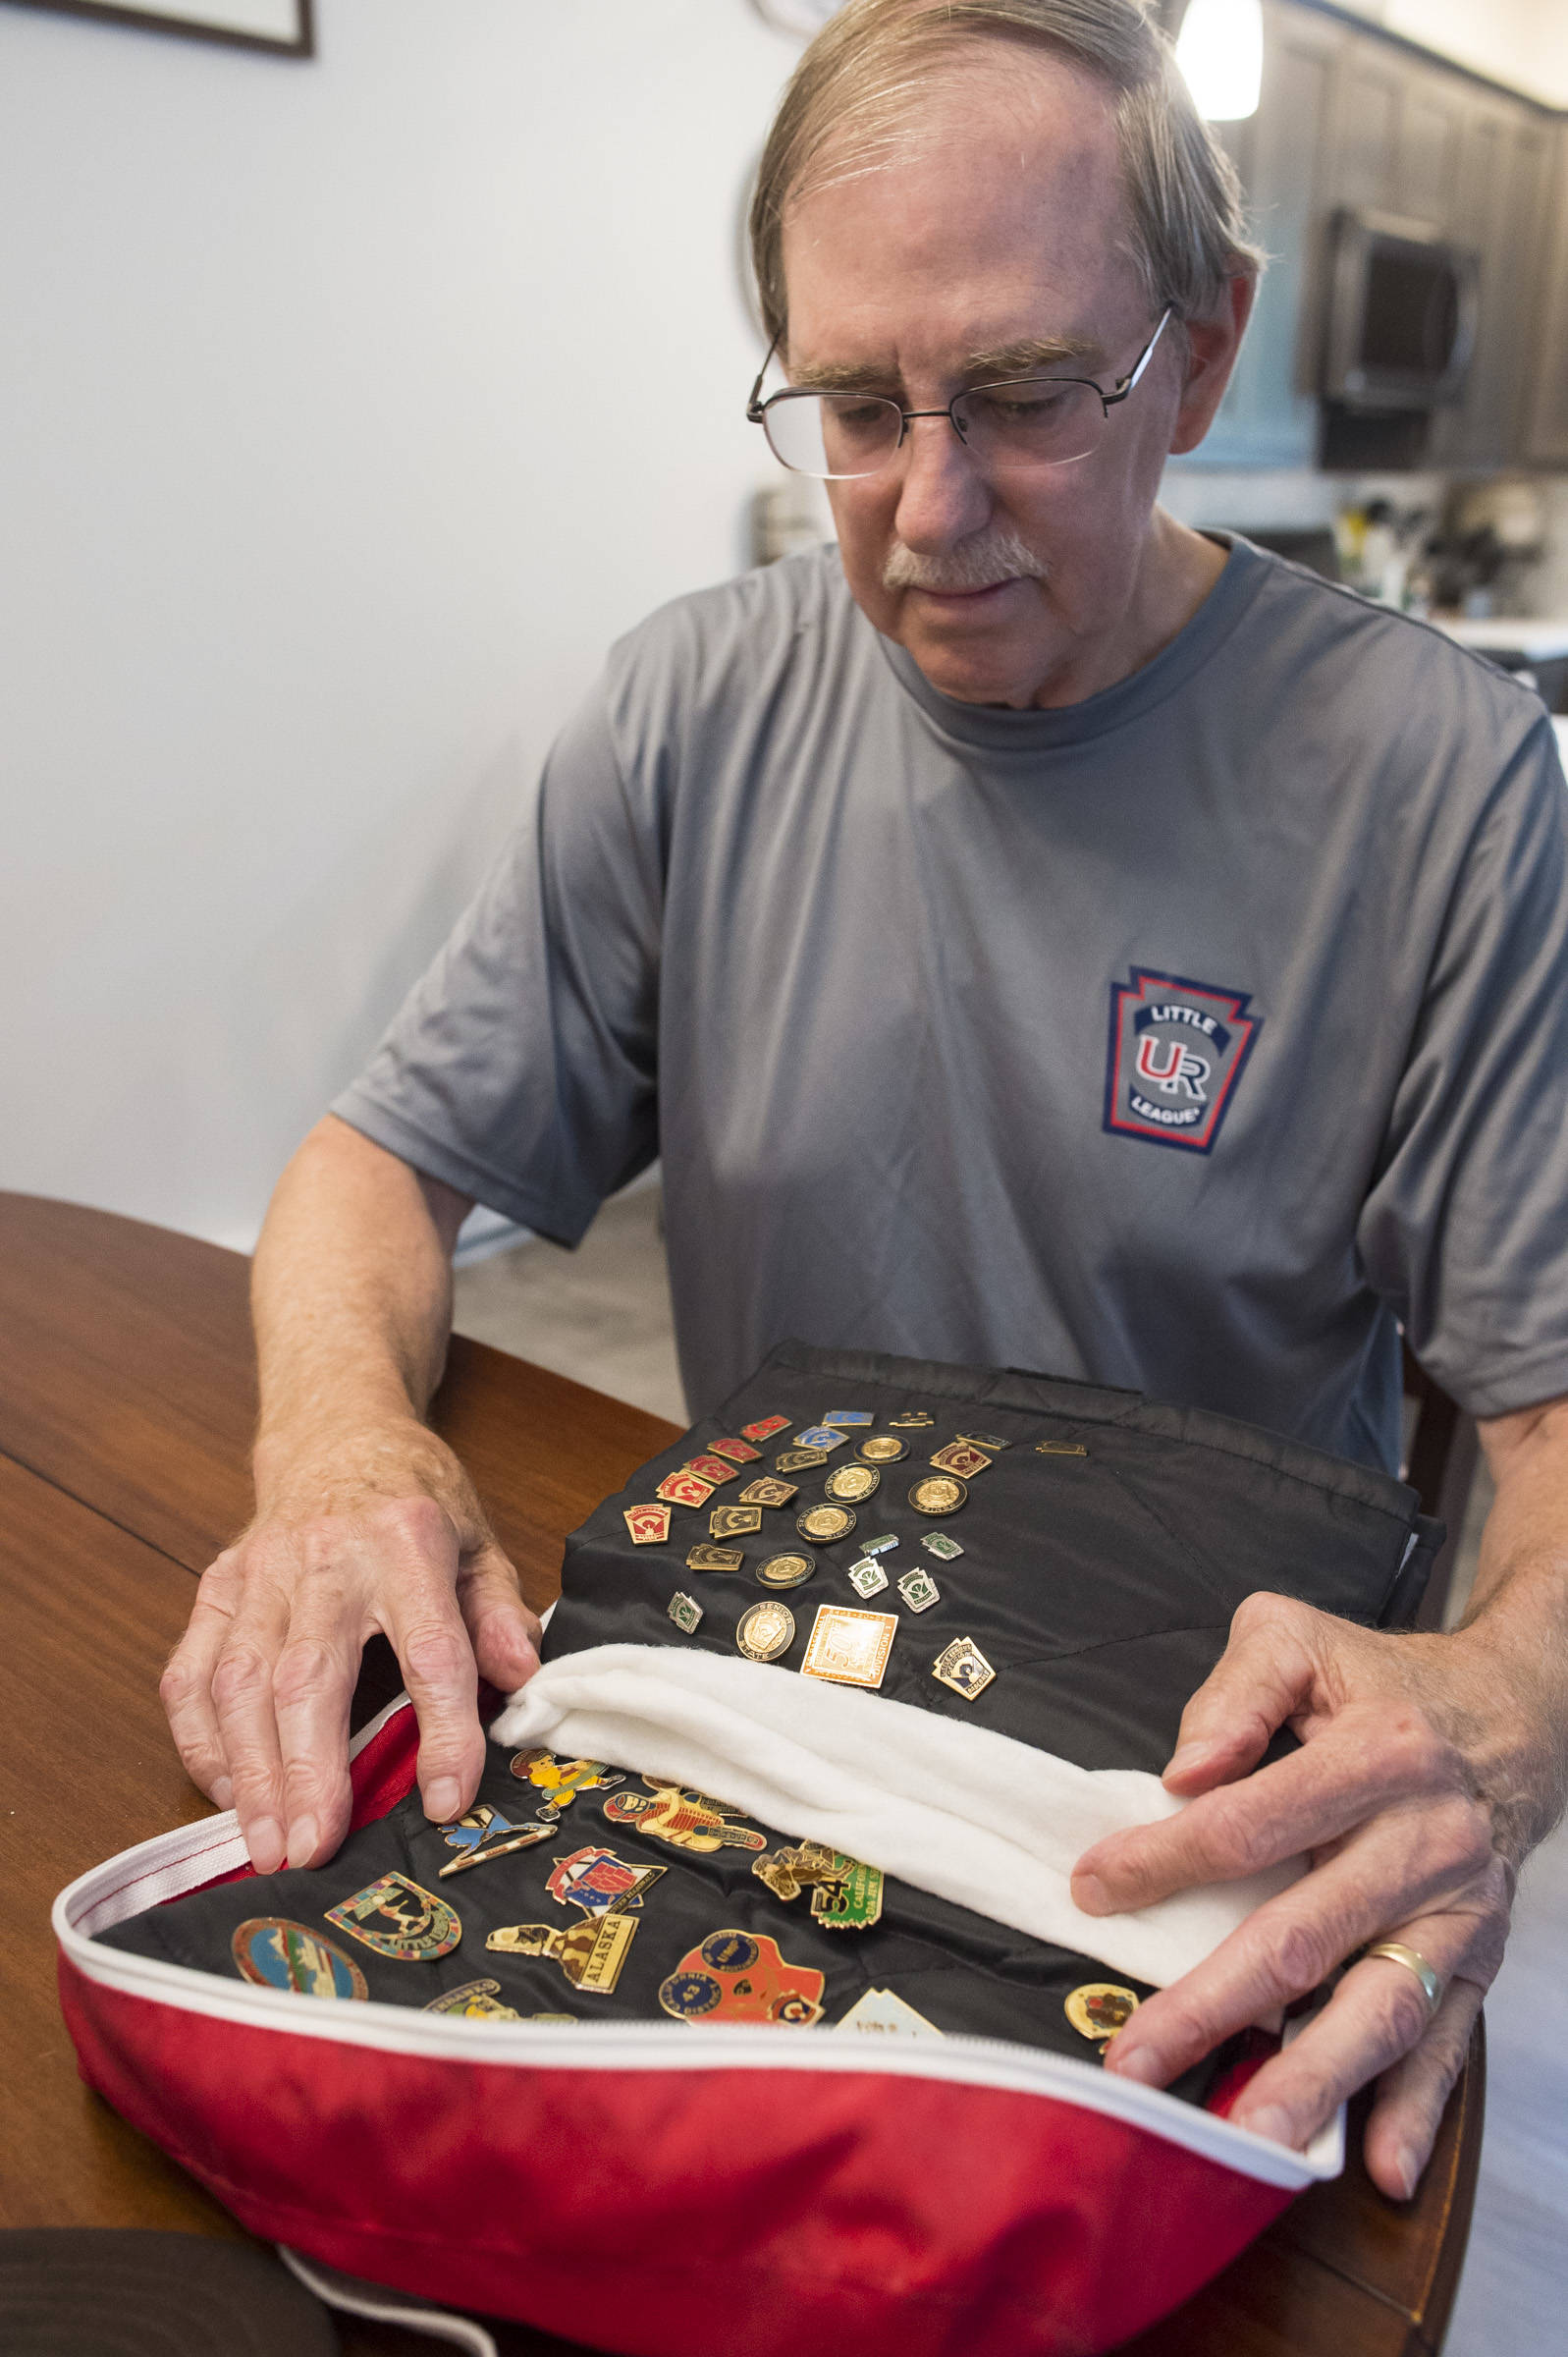 Tom Karpstein, 70, show a portion of his collection of baseball tournament pins as he talks Thursday, August 2, 2018, about his long baseball umpiring role in Juneau. (Michael Penn | Juneau Empire)